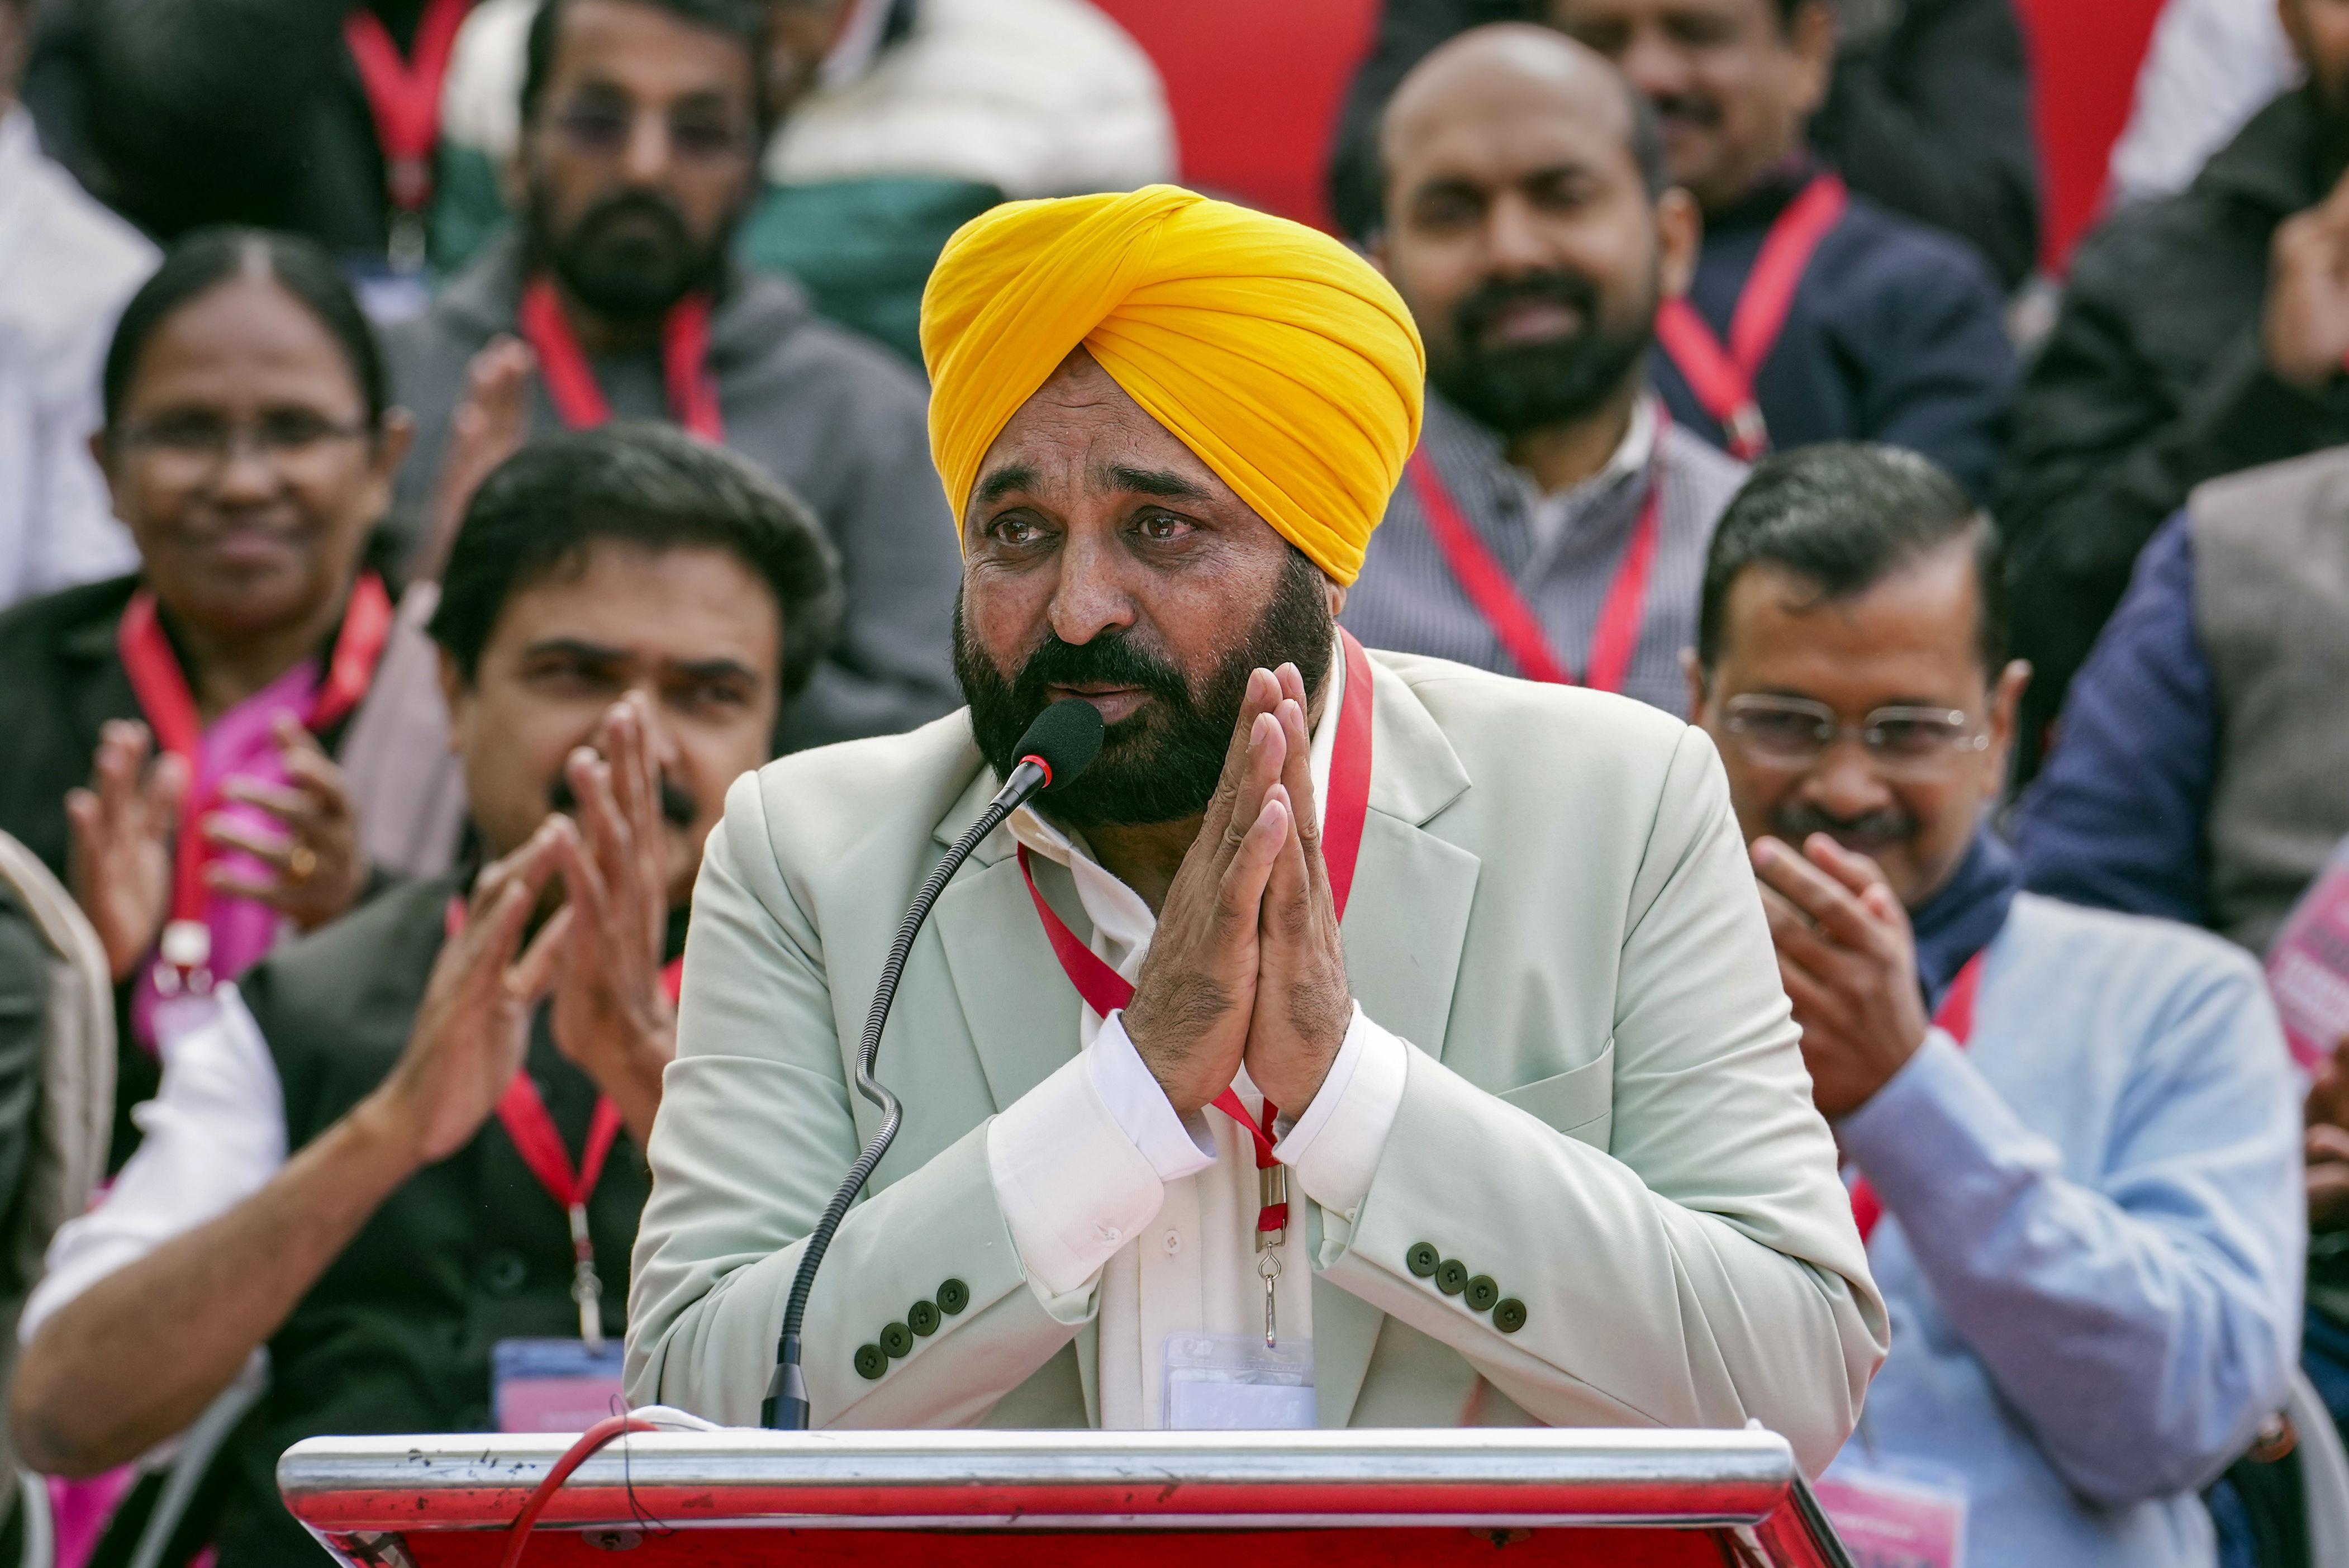 only those elected will rule in democracy: bhagwant mann at ldf protest